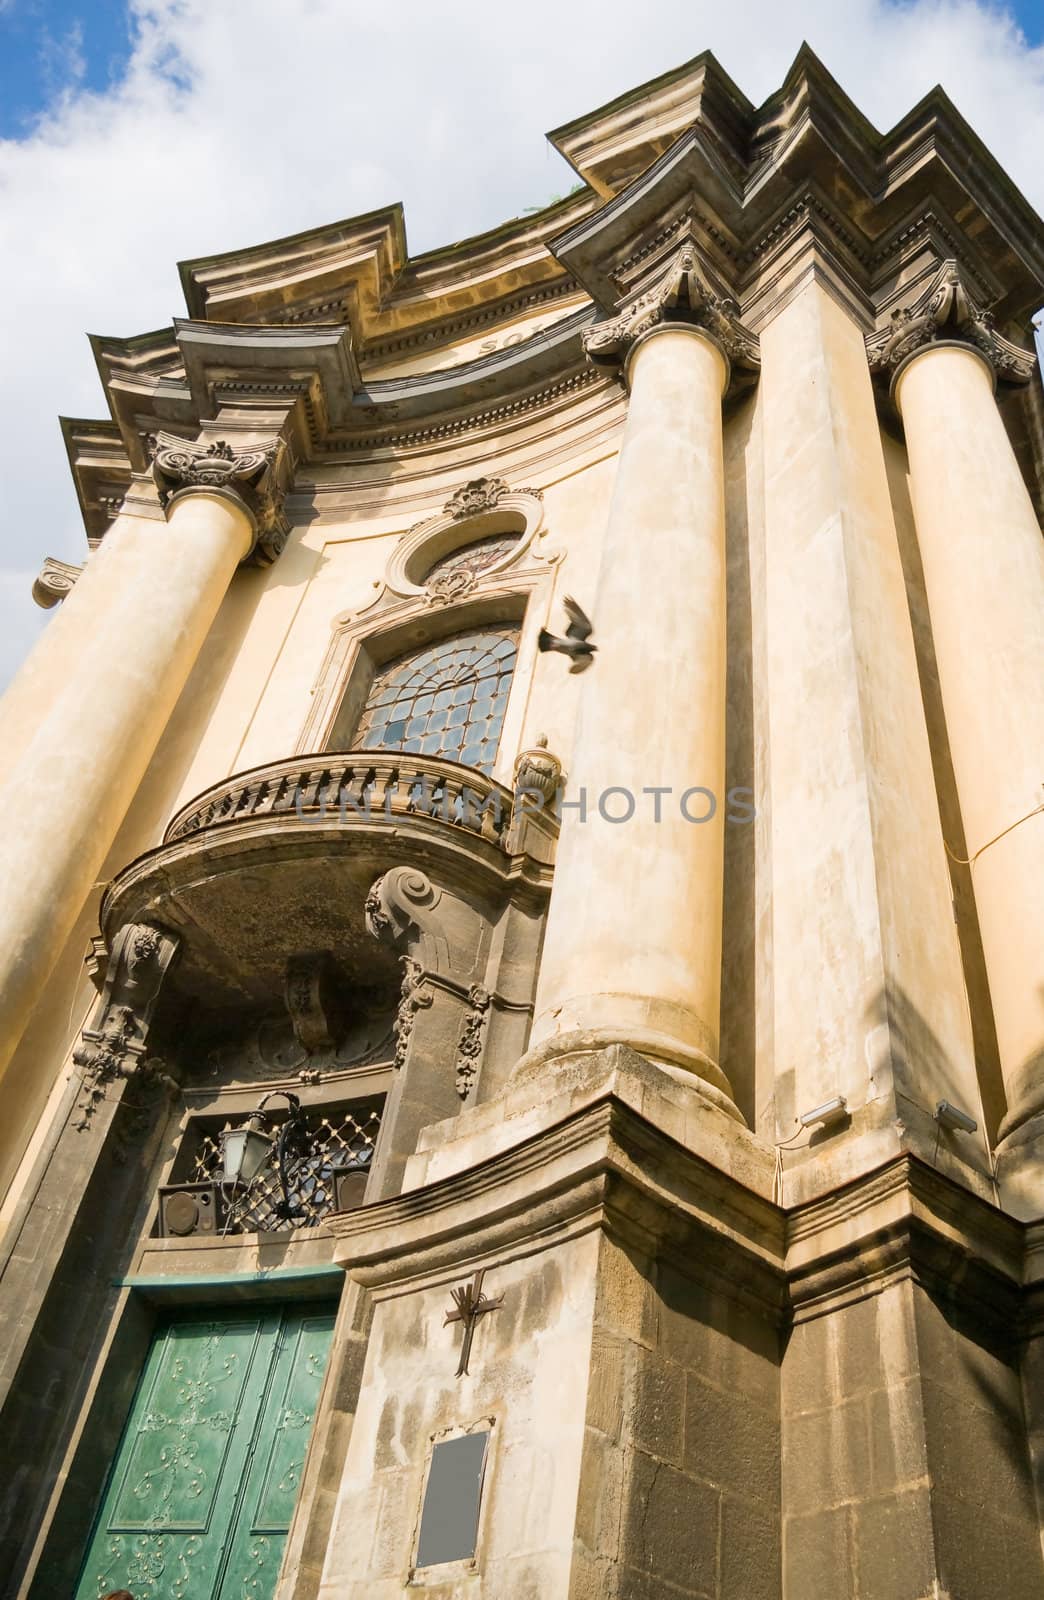 Dominican cathedral in Lviv, Ukraine 